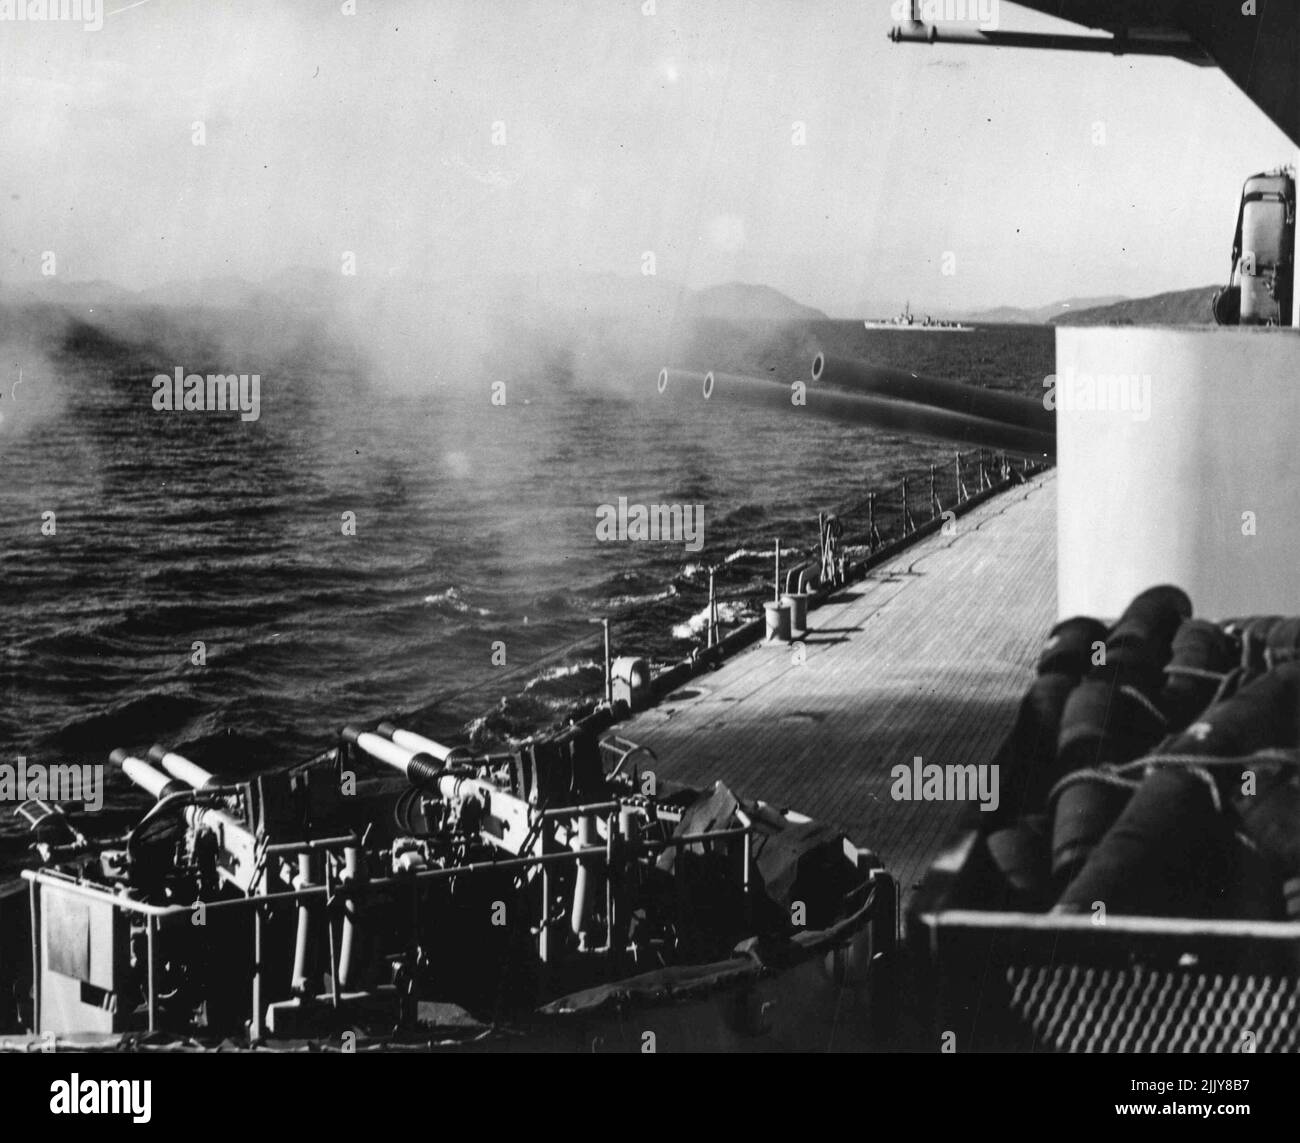 The Big eight inch guns of the heavy cruiser Los Angeles are shown as they boom a fiery message across Wonsan Harbor during a constant day-long bombardment of the besieged coastal port. The Los Angeles brought her eight and five inch guns to bear on enemy supply routes and military installations in and around Wonsan throughout the day. In the background is the destroyer USS Lyman K. Swenson, which screened the Los Angeles during Wonsan Operation. October 23, 1951. (Photo by Official U.S. Navy Photograph). Stock Photo